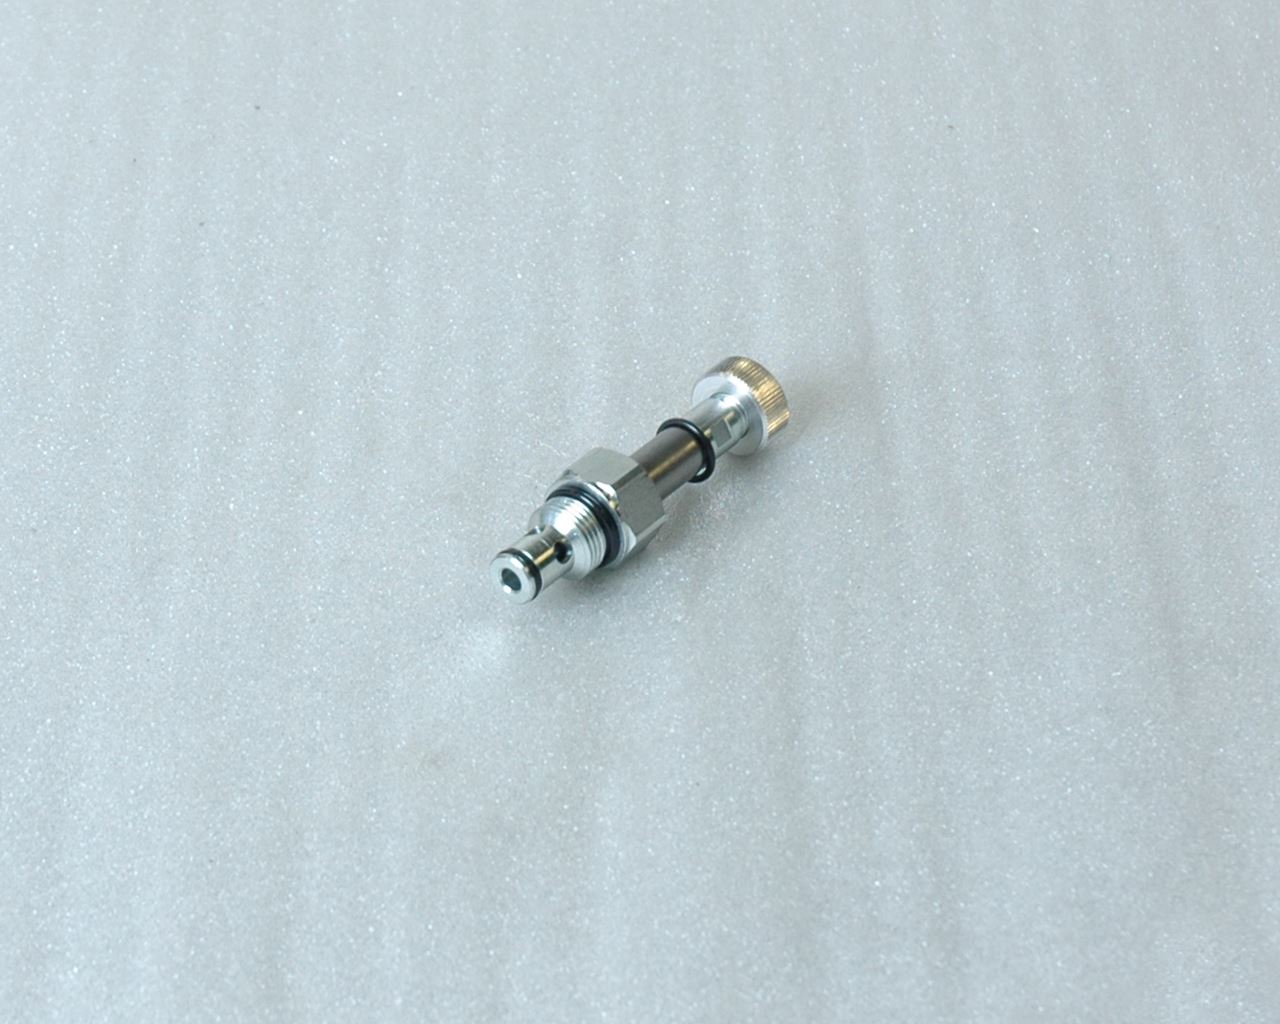 Lift table spare part - Cartridge valve, single-acting